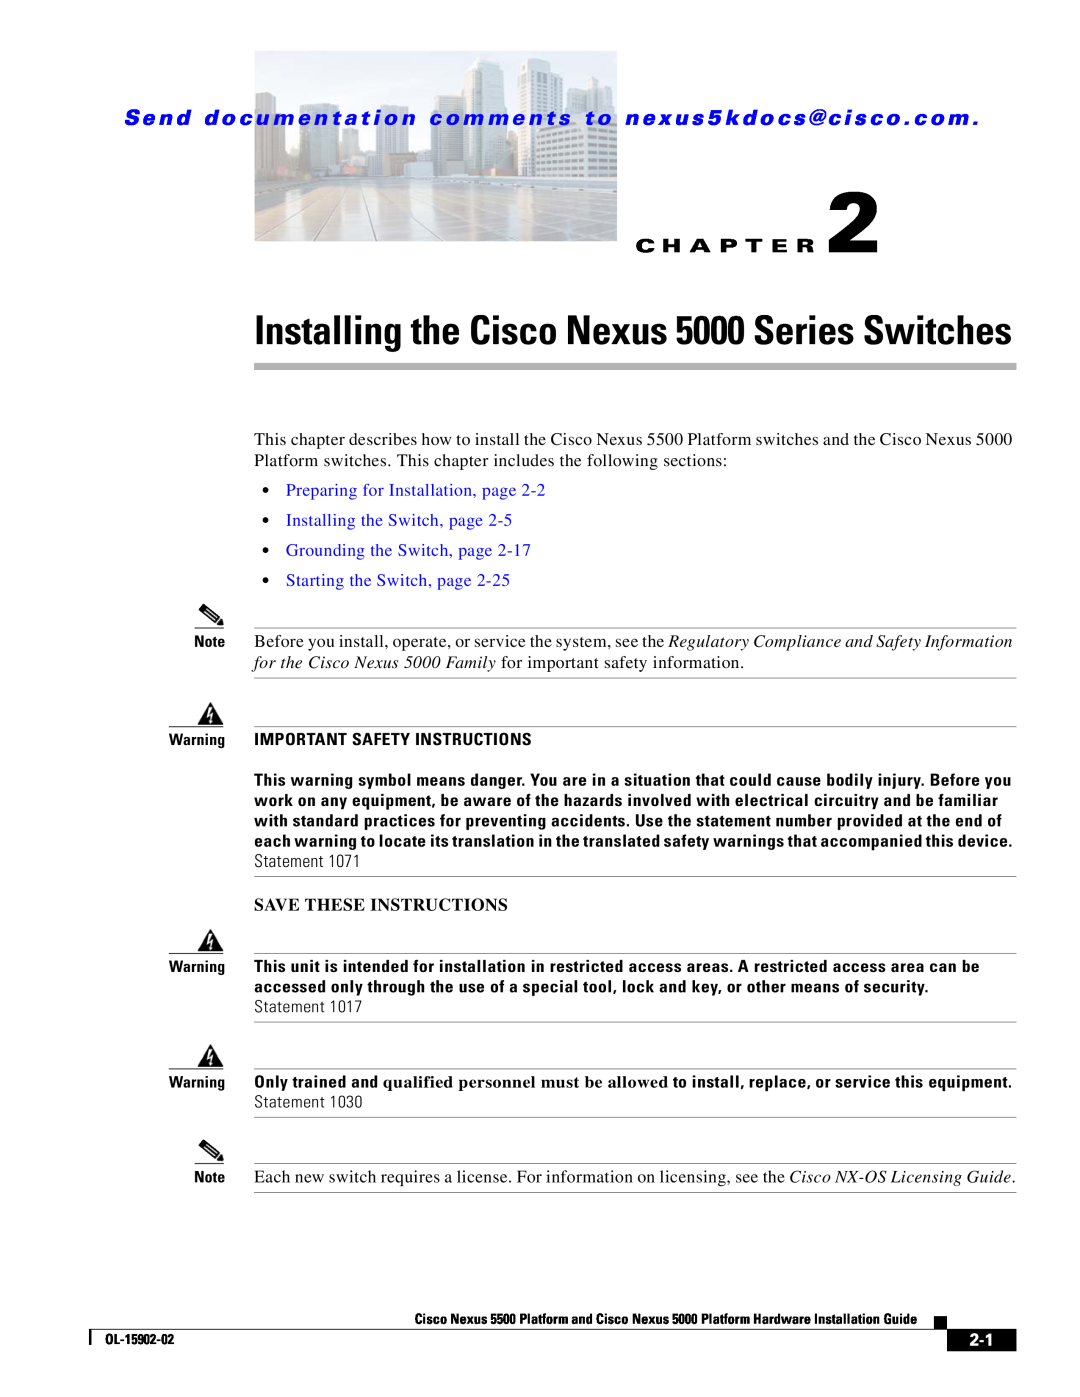 Cisco Systems manual Installing the Cisco Nexus 5000 Series Switches, C H A P T E R, Save These Instructions 